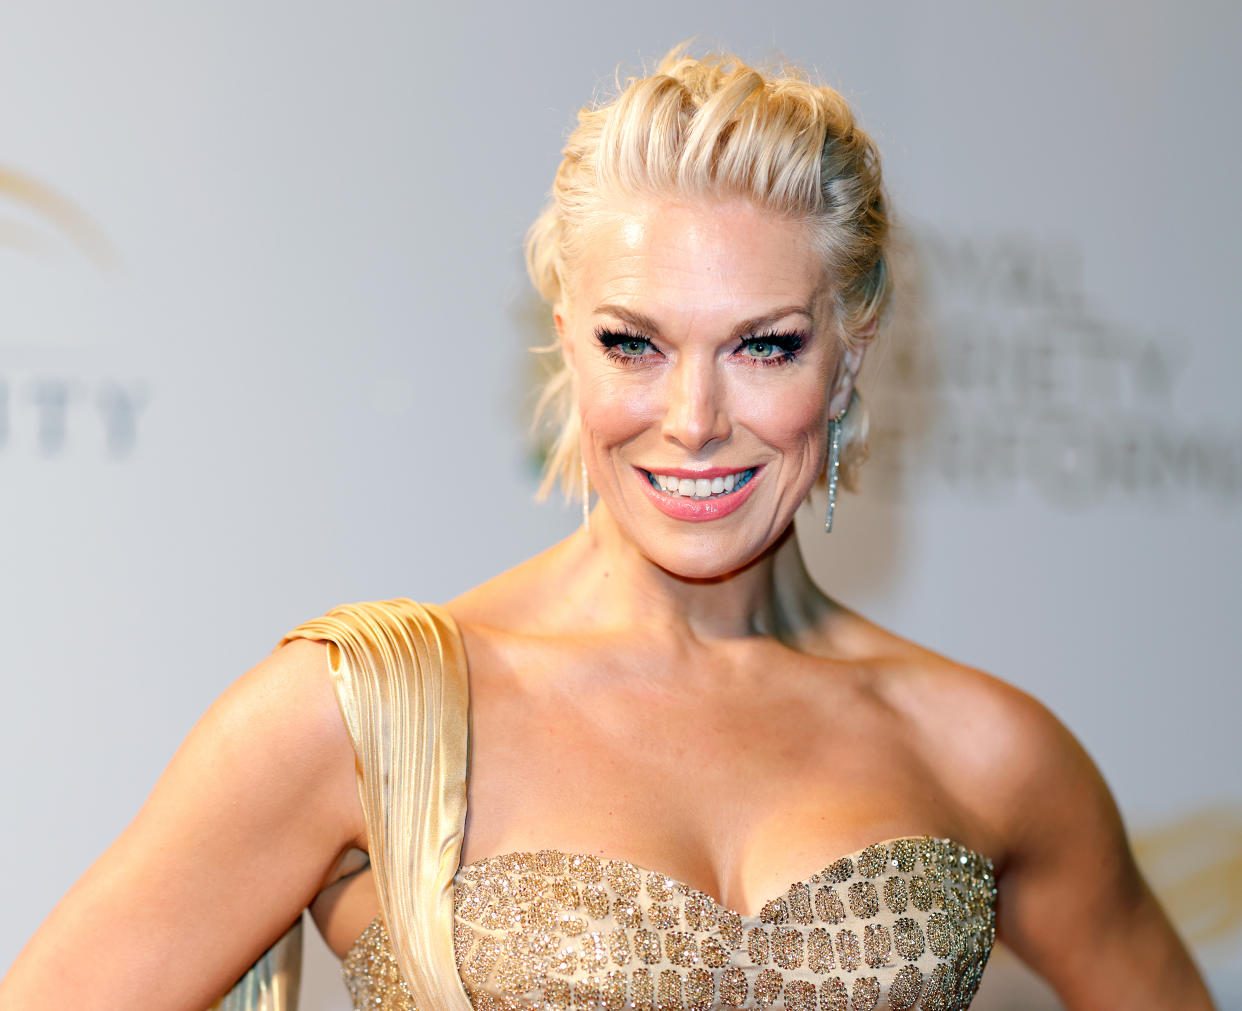 Image of Hannah Waddingham who has discussed the bullying she experienced as a child. (Getty Images)